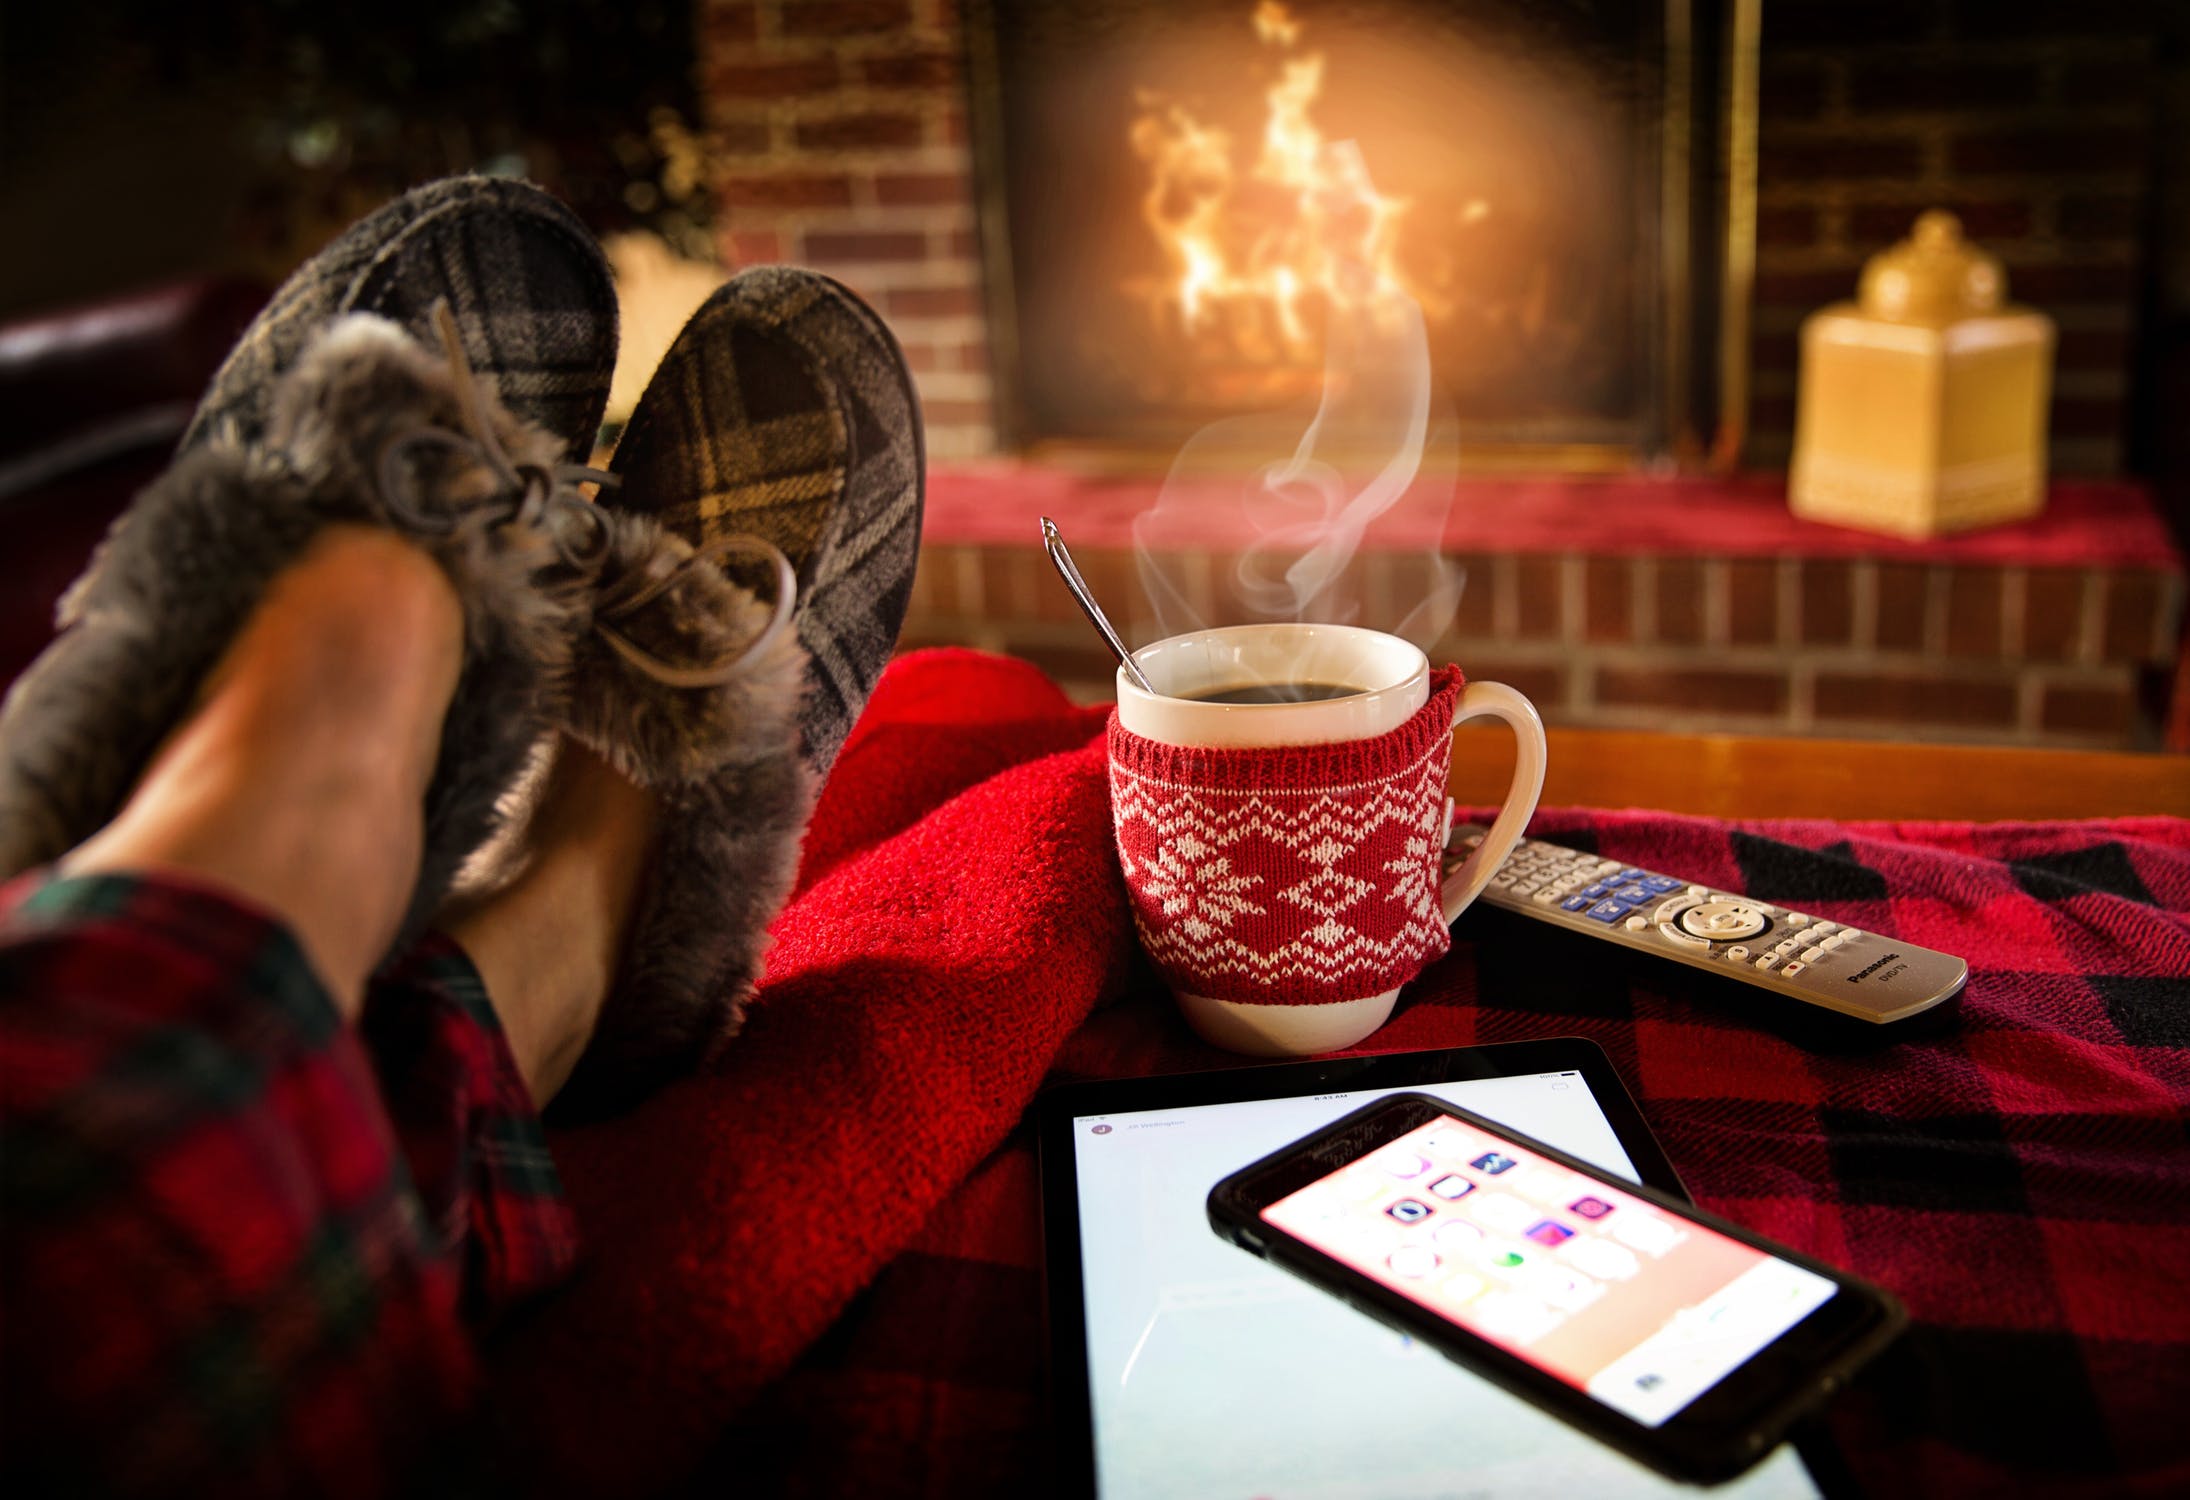 Woman wearing slippers and flannel pajamas sitting in front of cozy fire with steaming cup of hot chocolate free from financial worries by using the avalance method